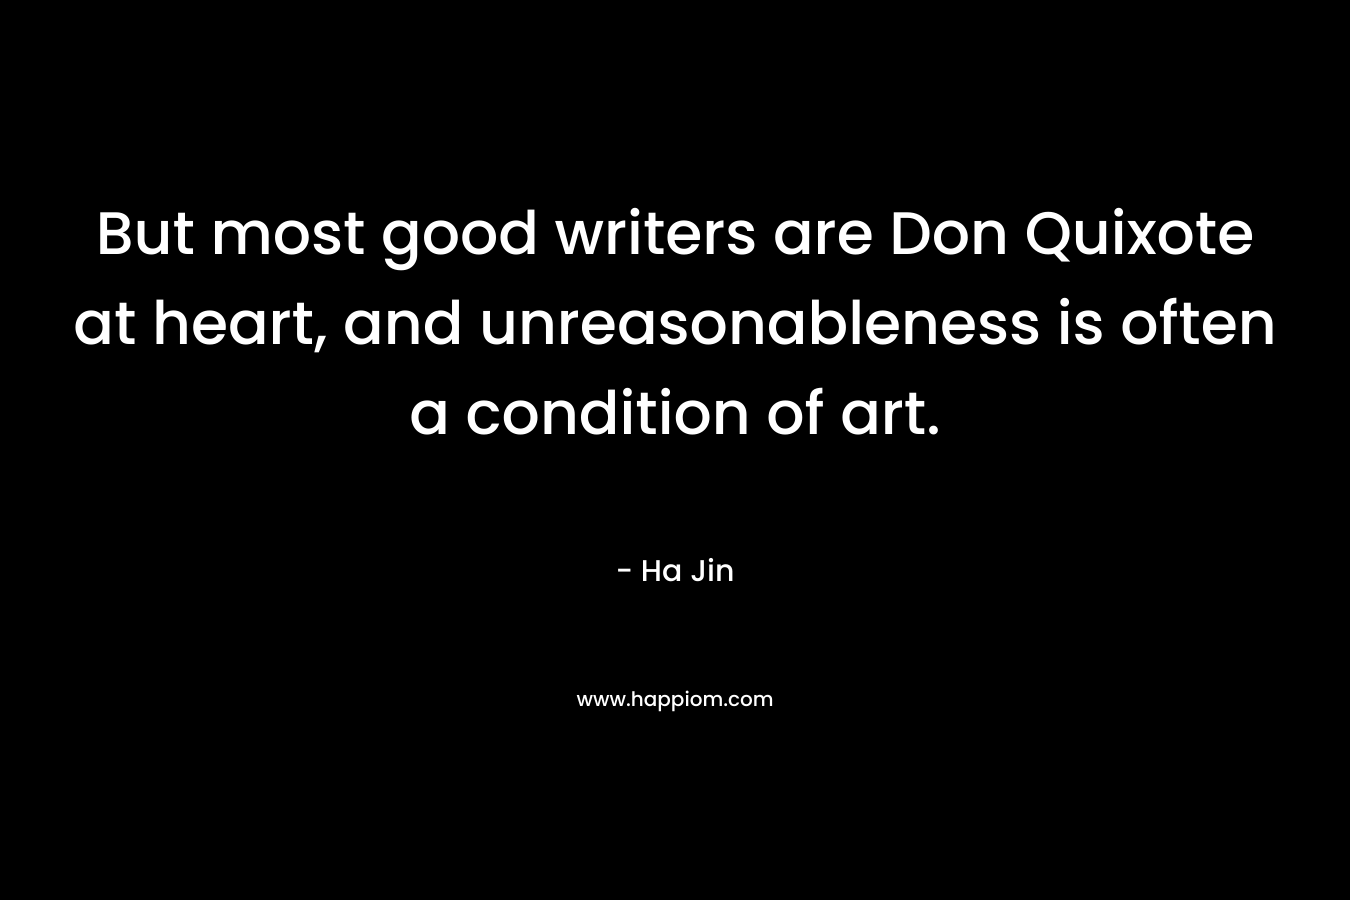 But most good writers are Don Quixote at heart, and unreasonableness is often a condition of art. – Ha Jin